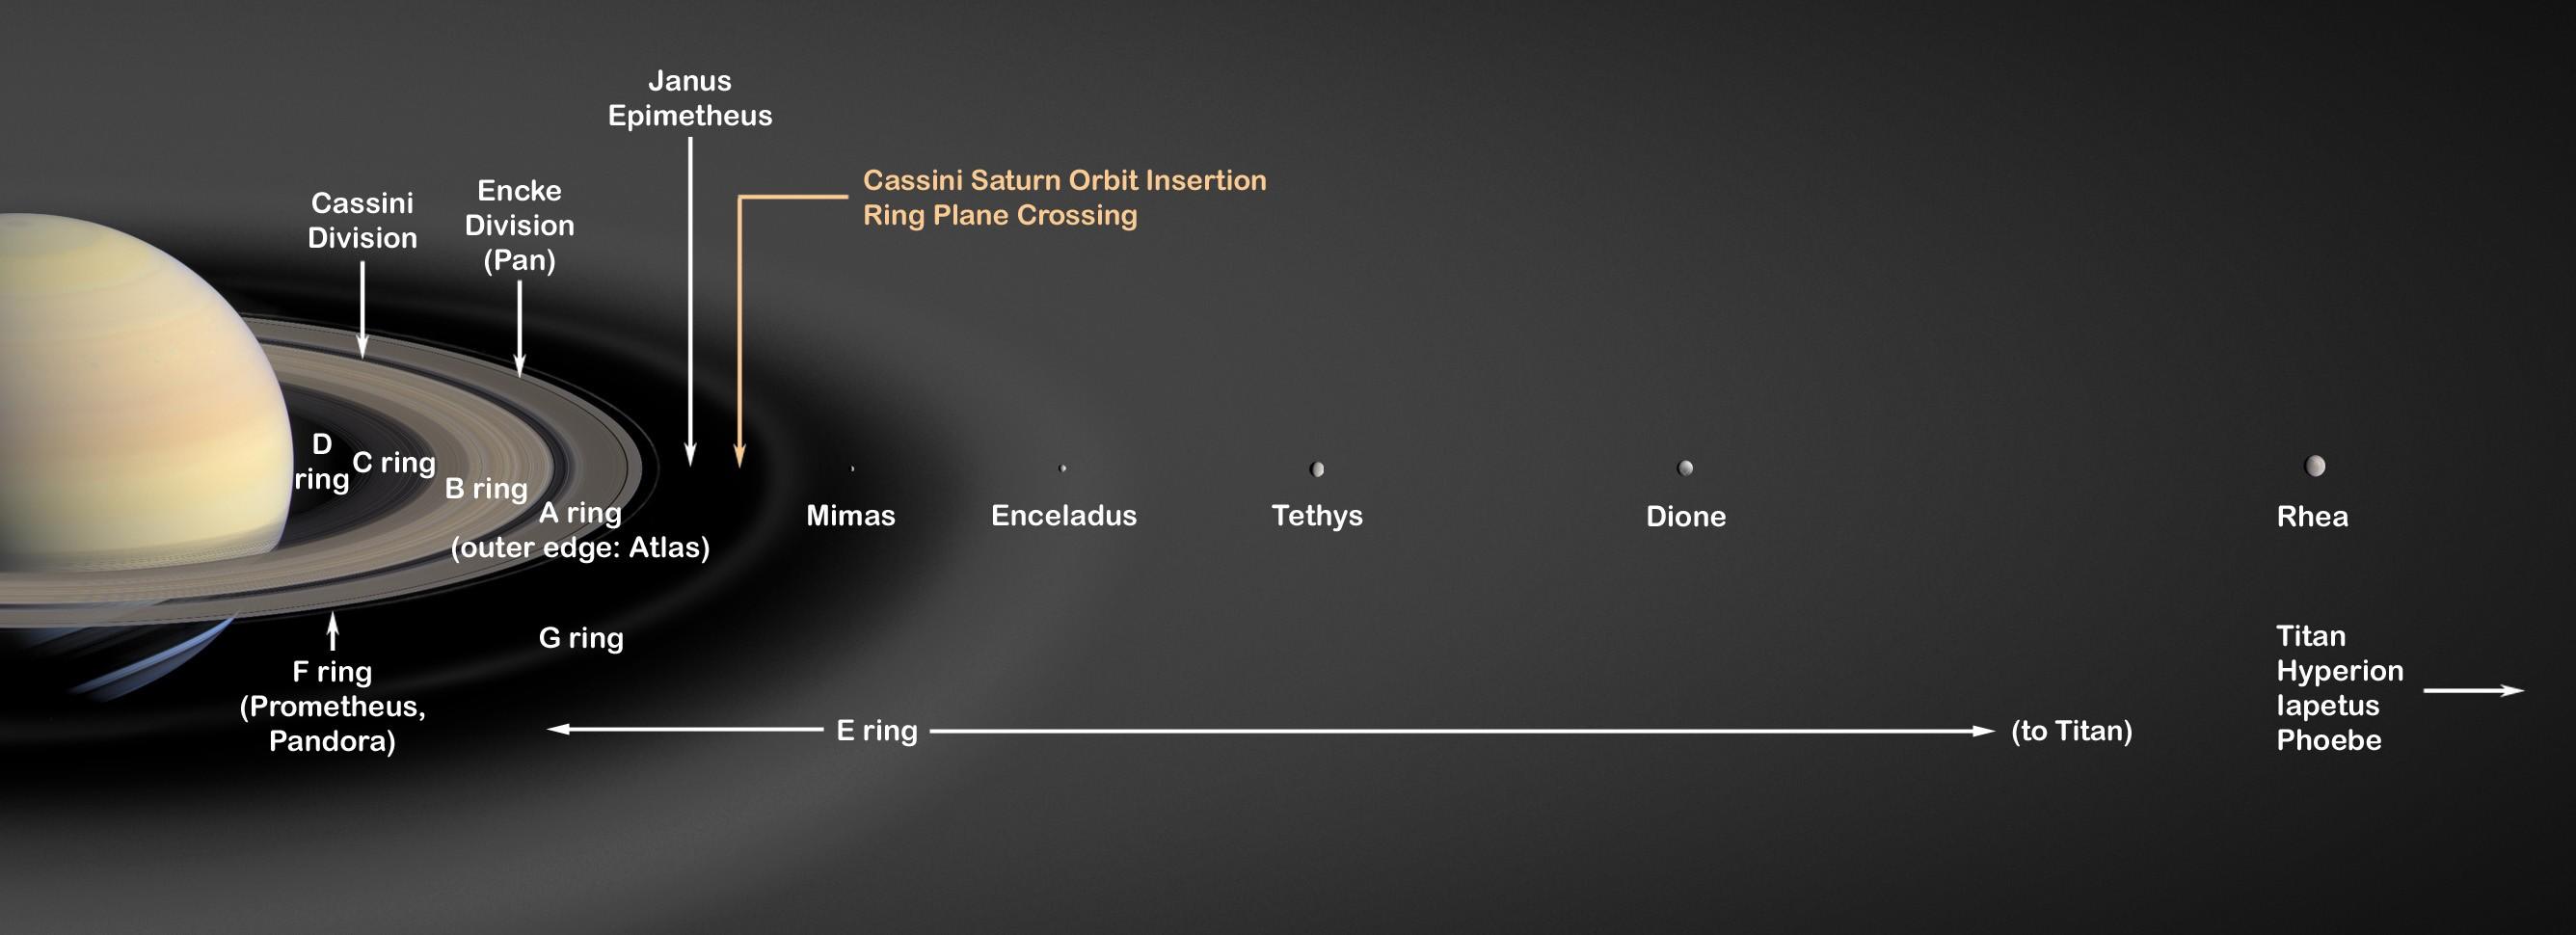 Saturn's rings an optical illusion?